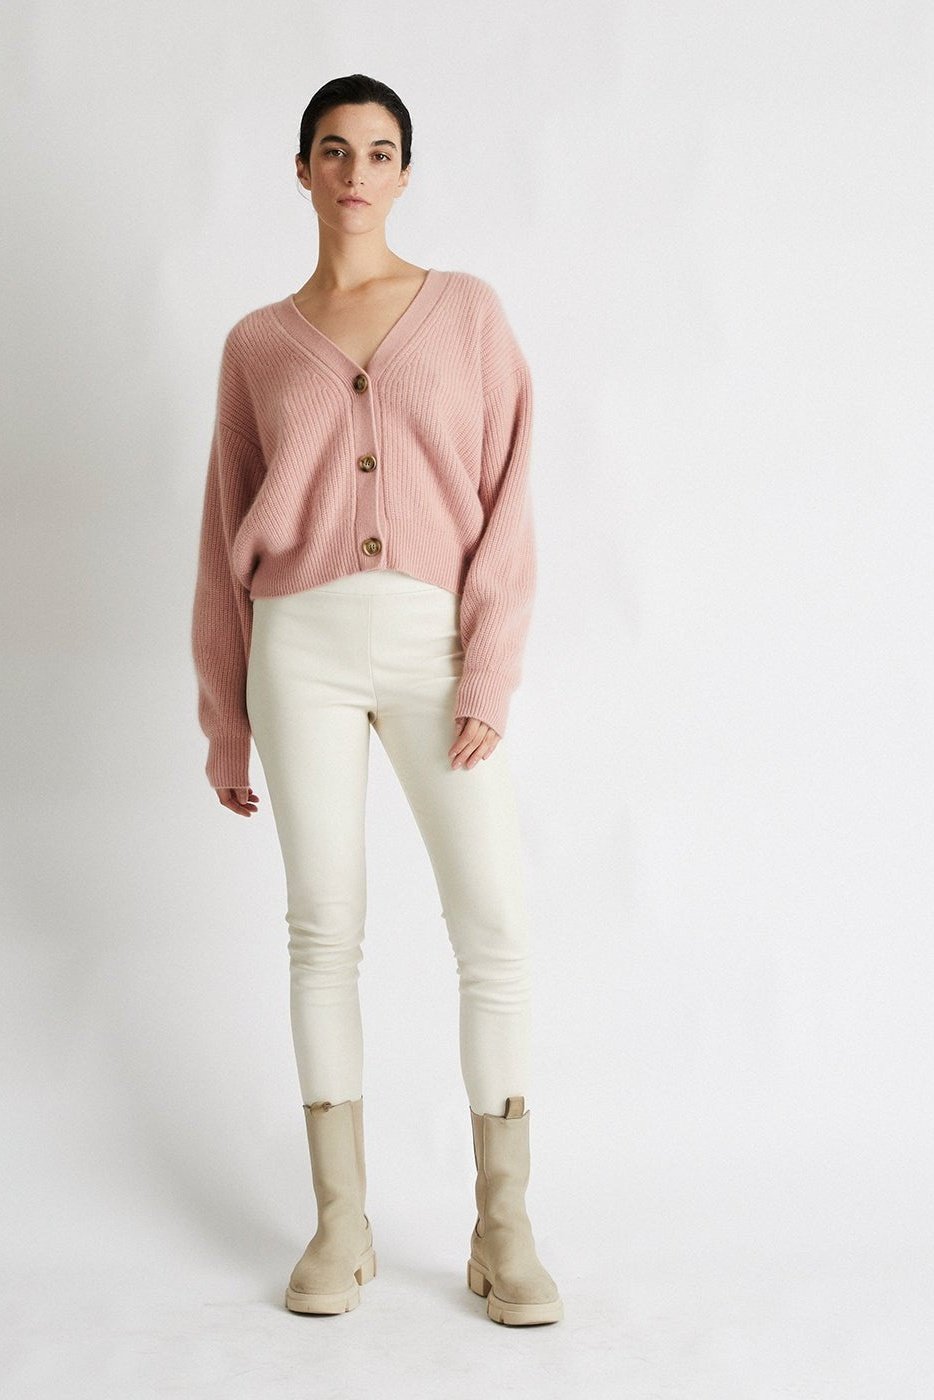 + Beryll Cashmere Cardigan Sweater | Baby Pink - +Beryll Cashmere Cardigan Sweater | Baby Pink - +Beryll Worn By Good People